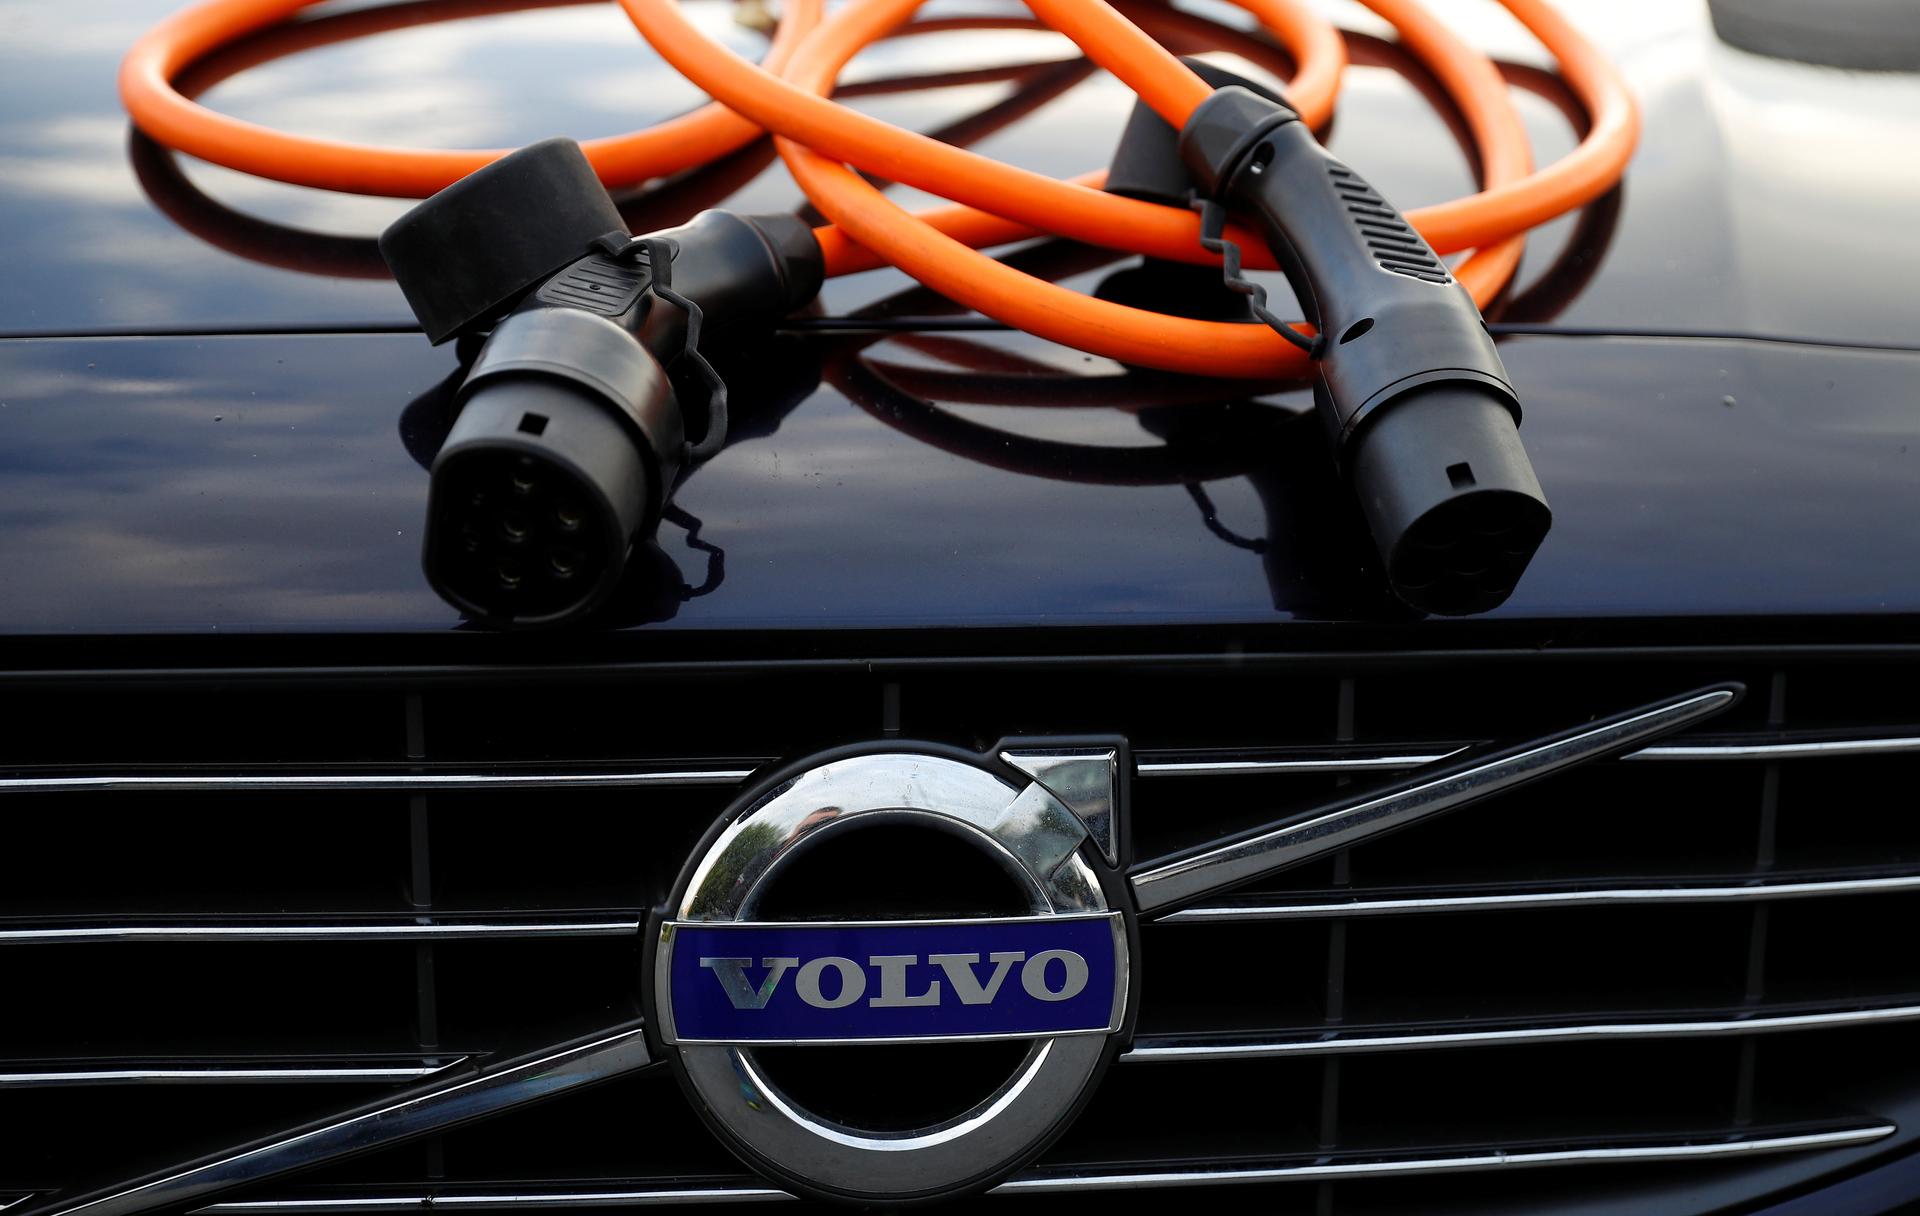 Volvo has promised to phase out gas and diesel-only powered vehicles 